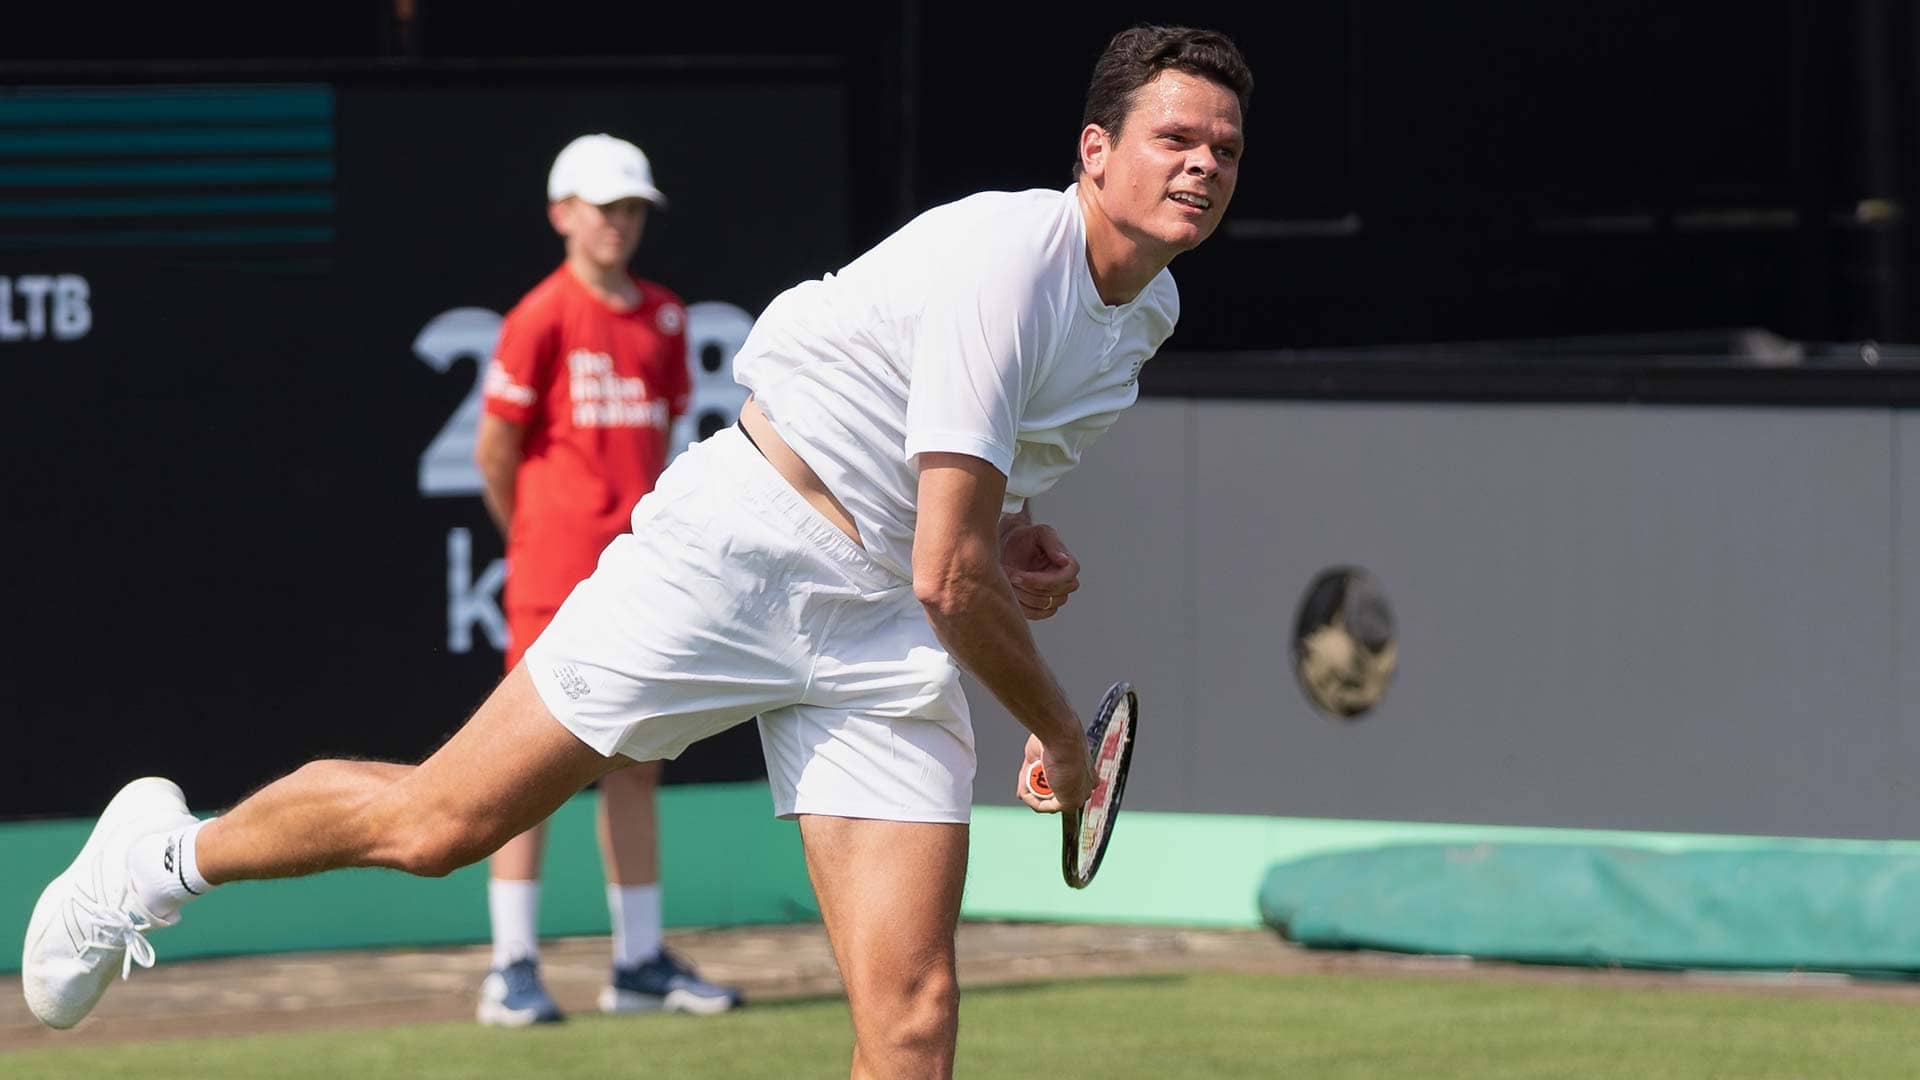 Milos Raonic in action during his 6-3, 6-4 victory against Miomir Kecmanovic on Monday in 's-Hertogenbosch.